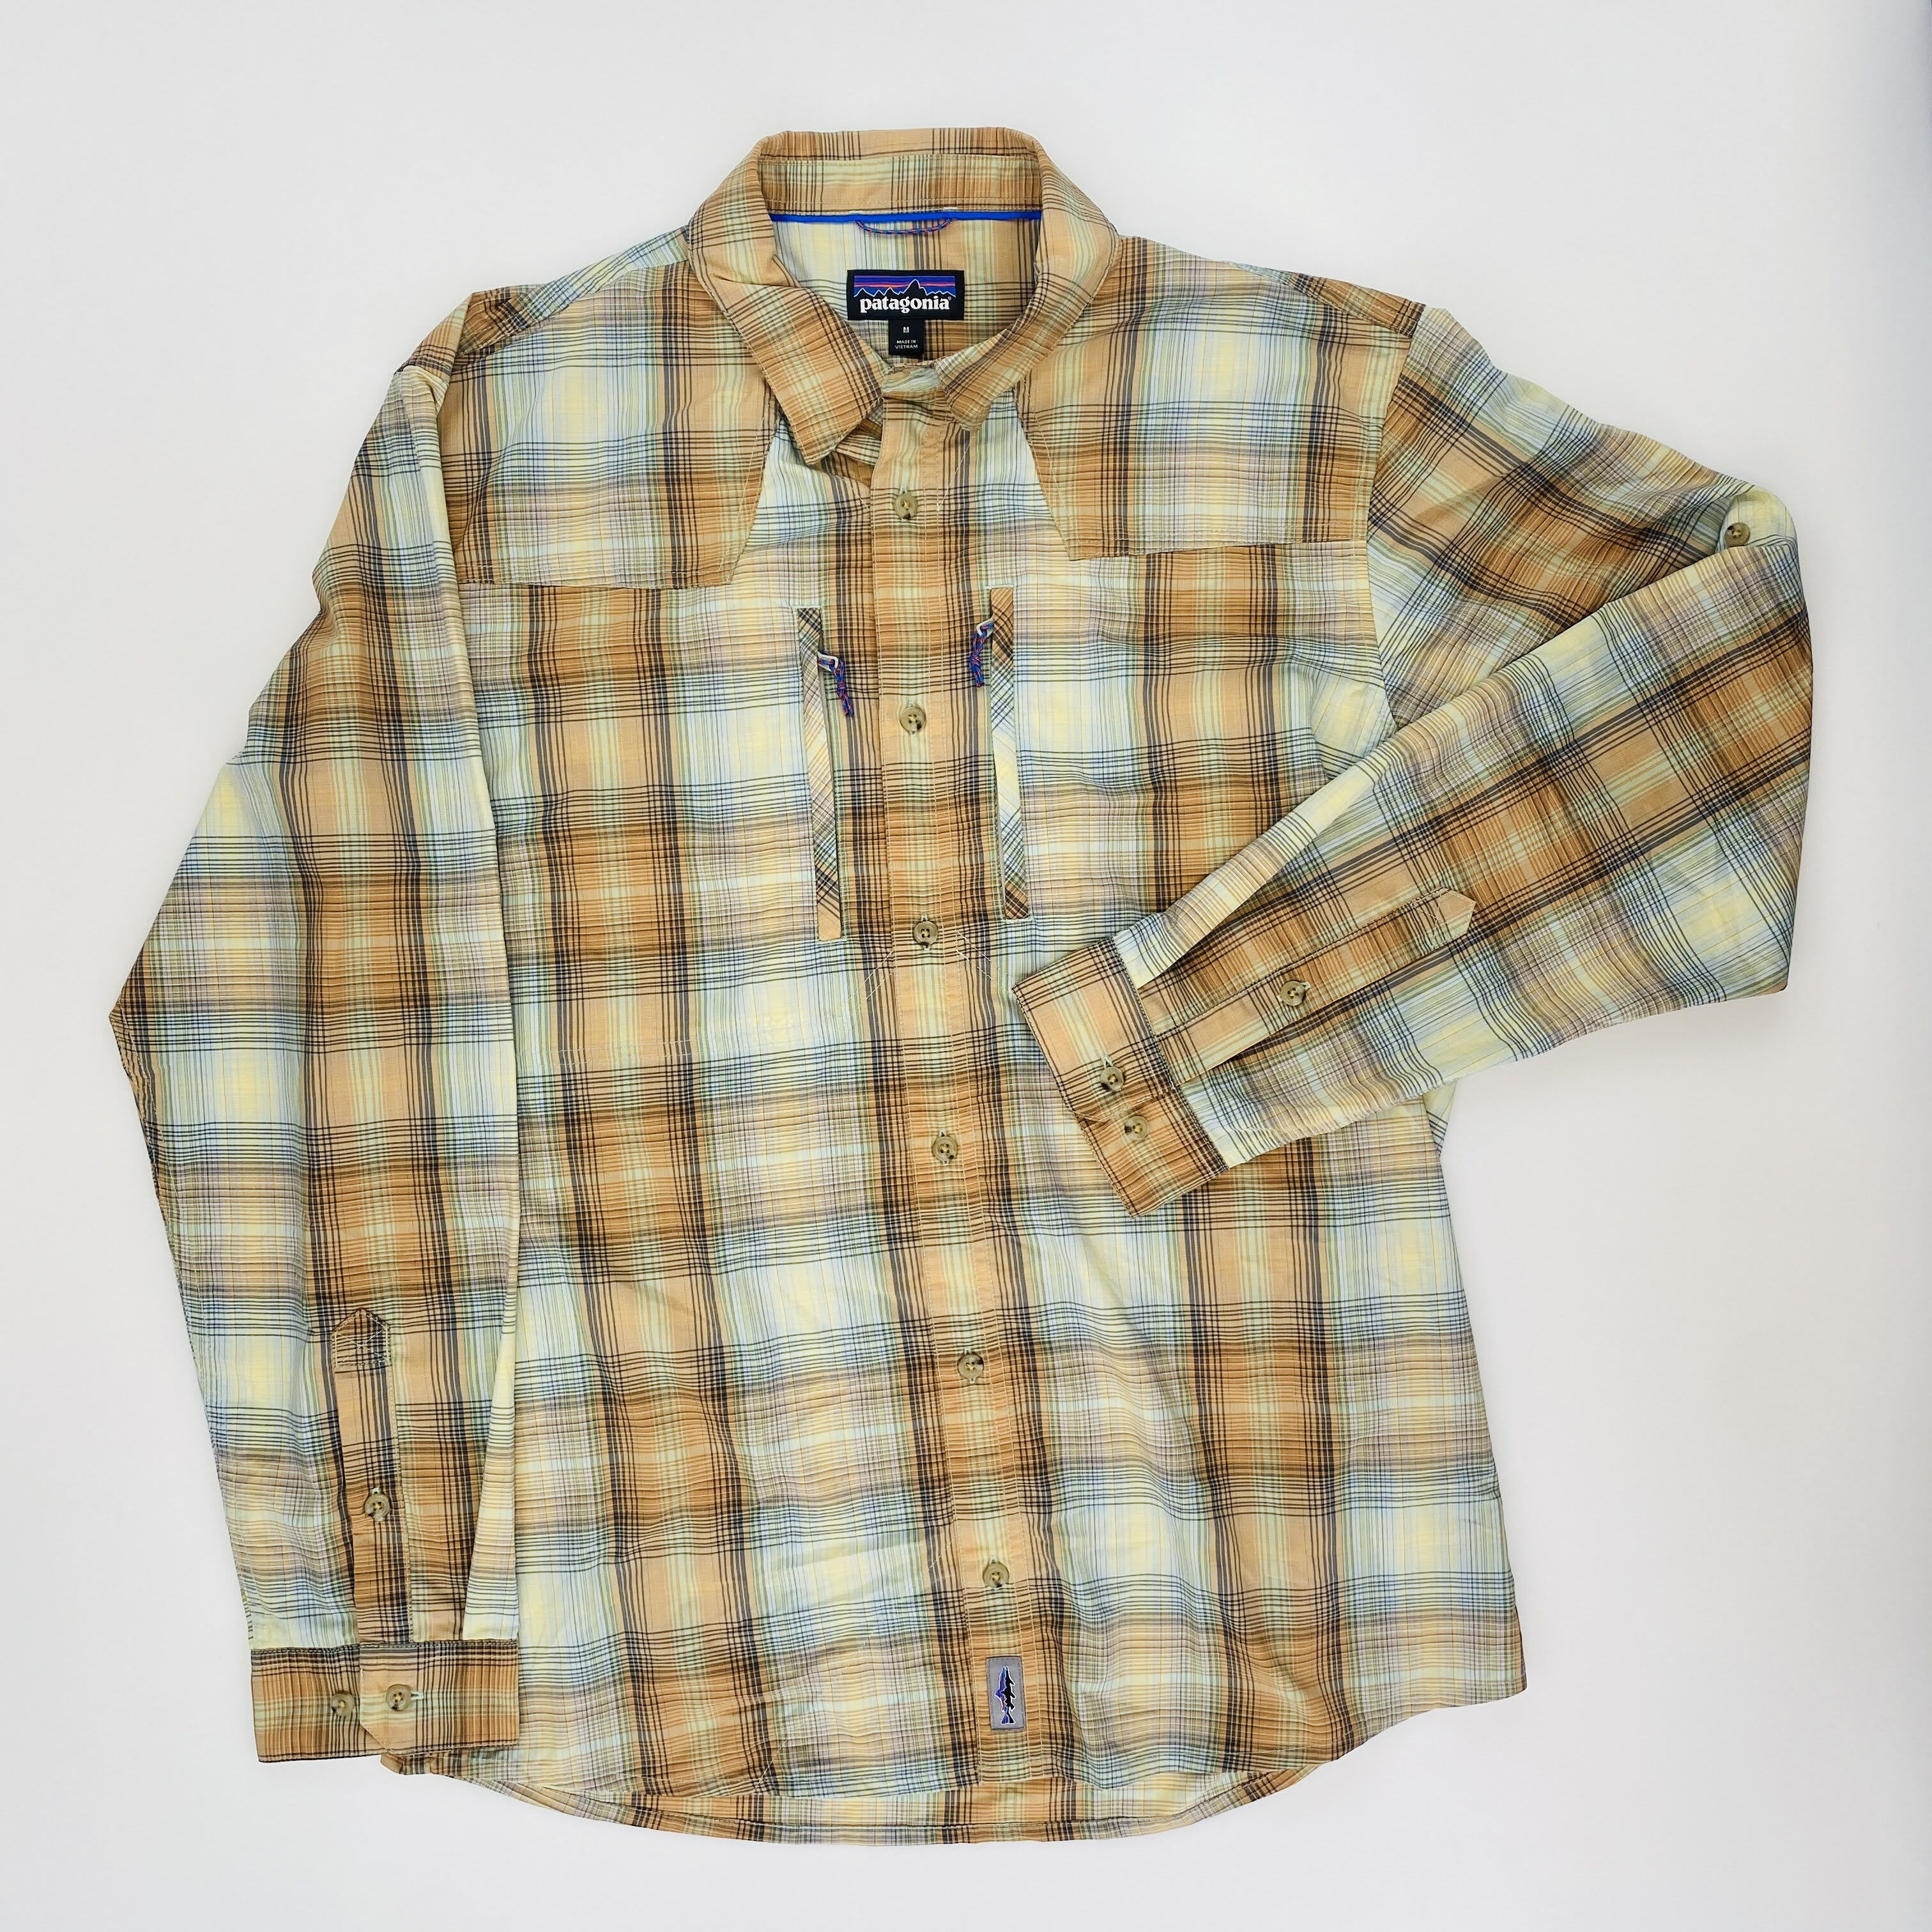 Patagonia M's L/S Sun Stretch Shirt - Seconde main Chemise homme - Multicolore - M | Hardloop